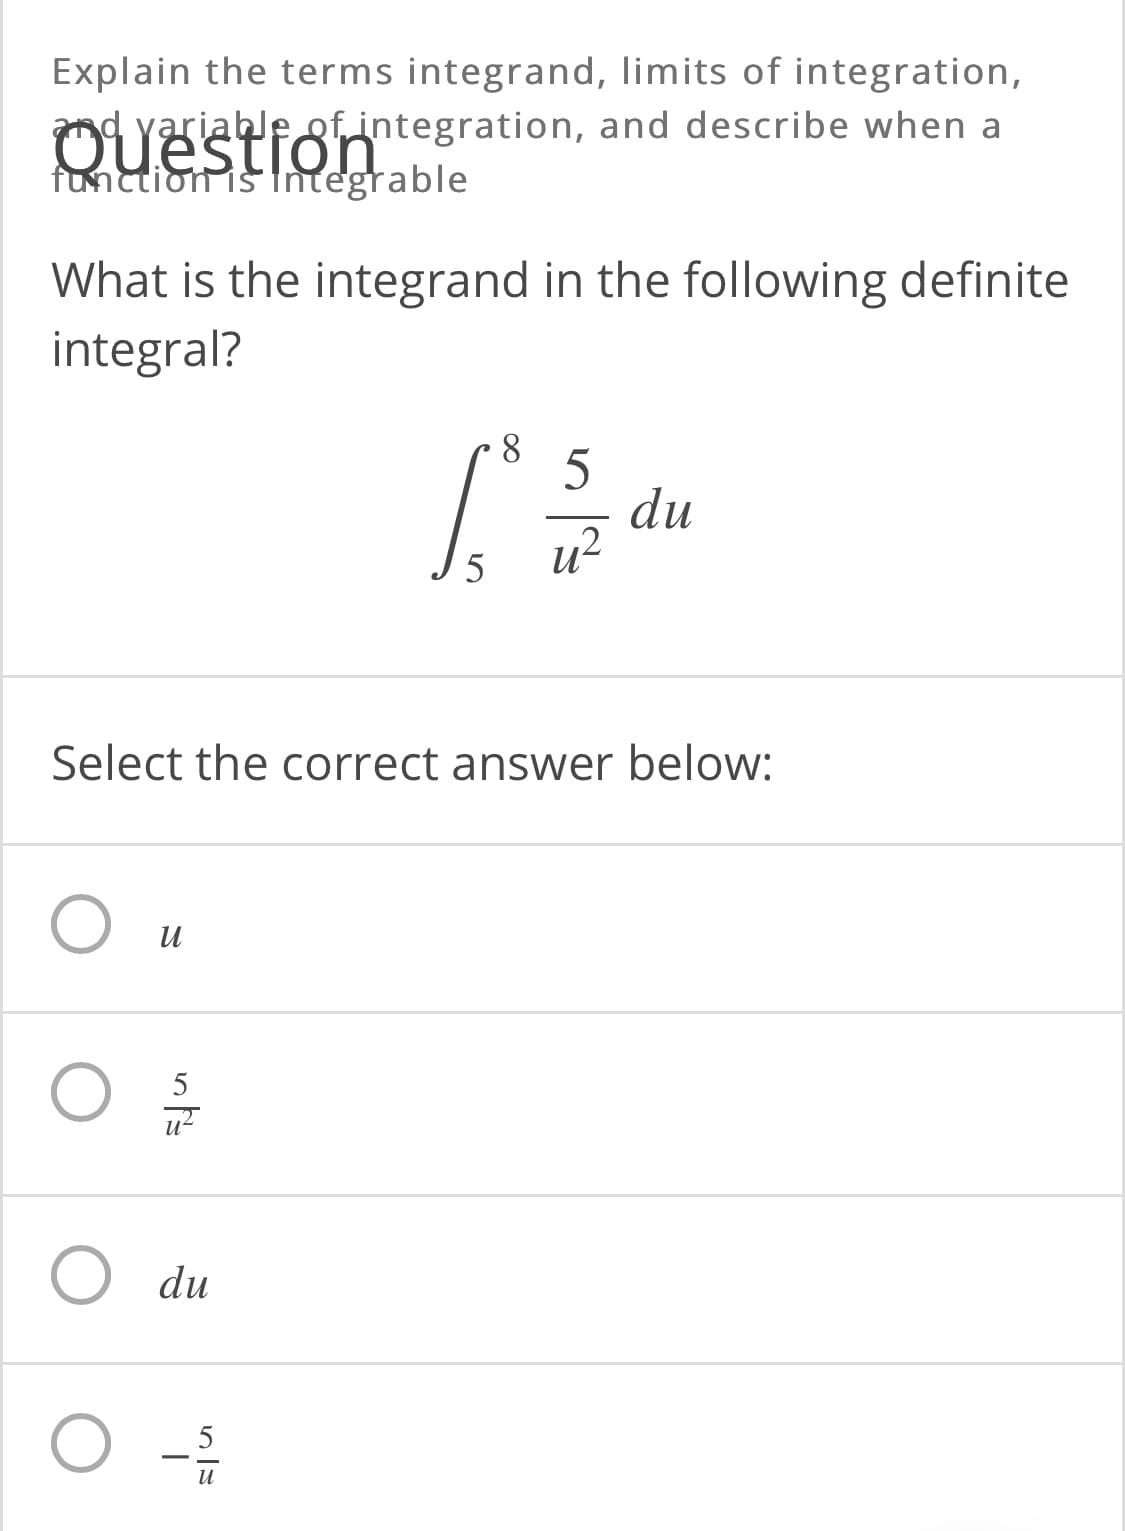 Explain the terms integrand, limits of integration,
d yariable of integration, and describe when a
Ouestion
function is tntegrable
What is the integrand in the following definite
integral?
8.
du
и2
Select the correct answer below:
и
5
O du
5
и
